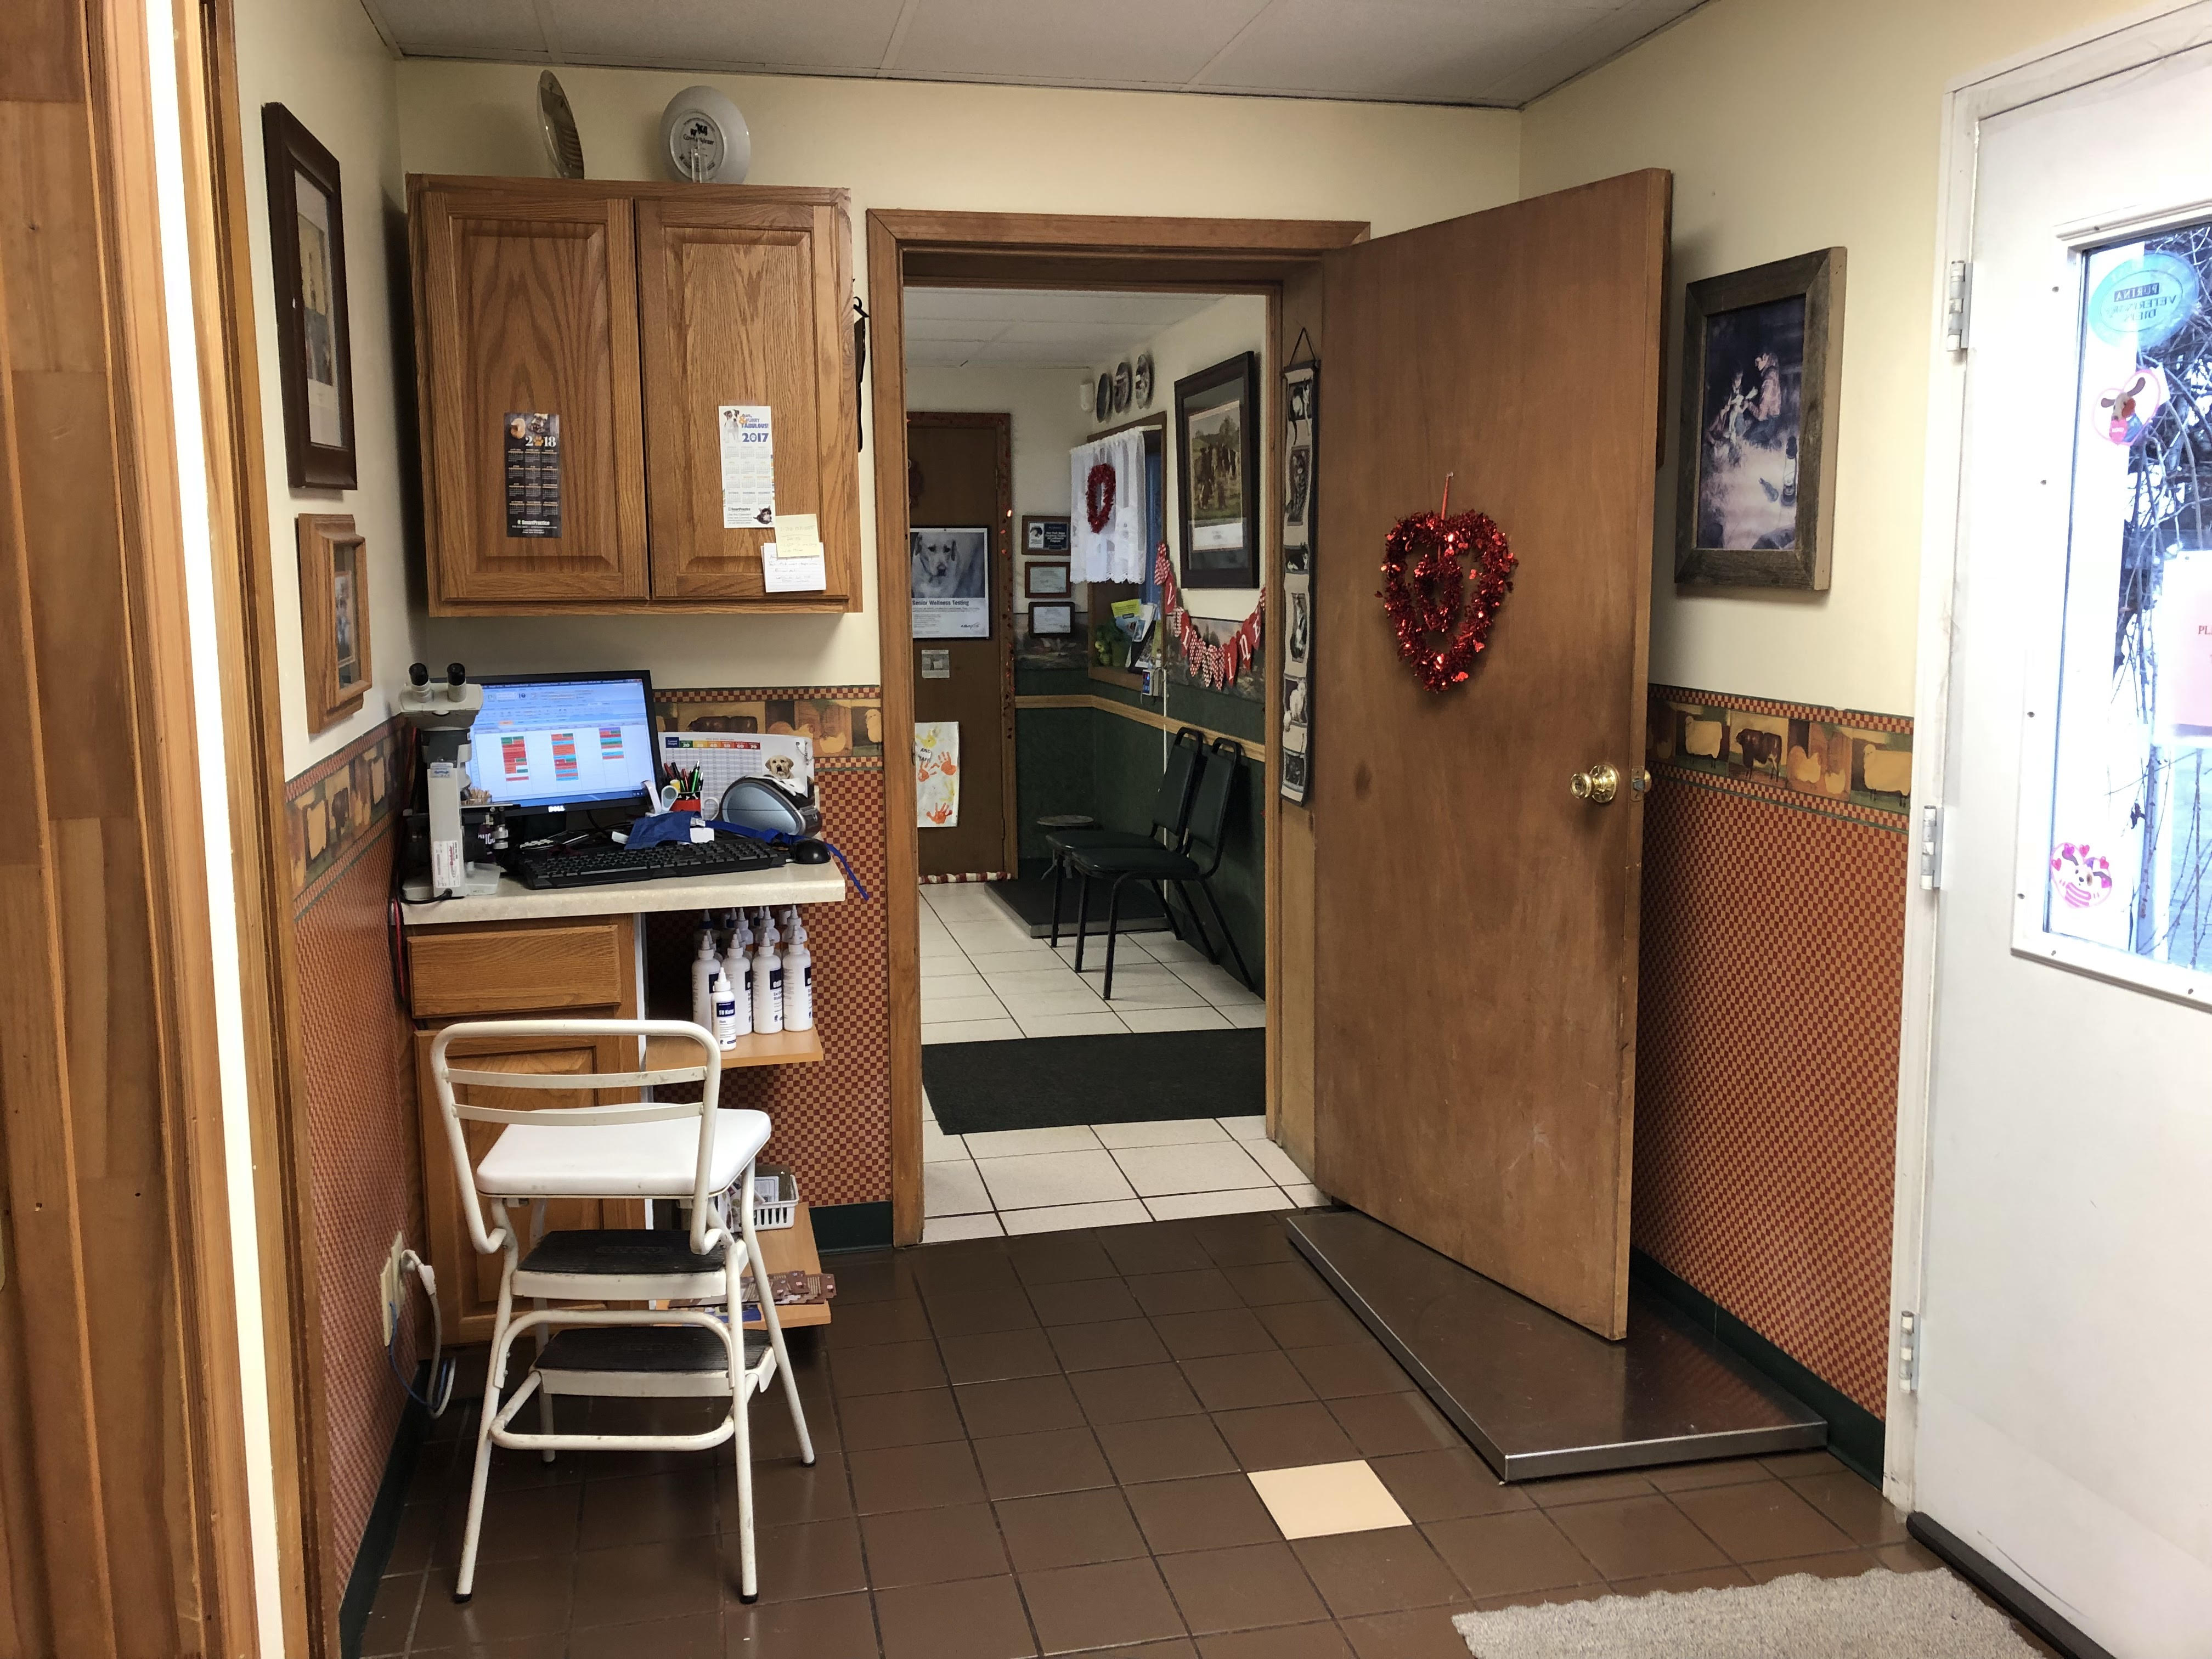 Country Lane Veterinary Services 15202 E Barre Rd, Albion New York 14411